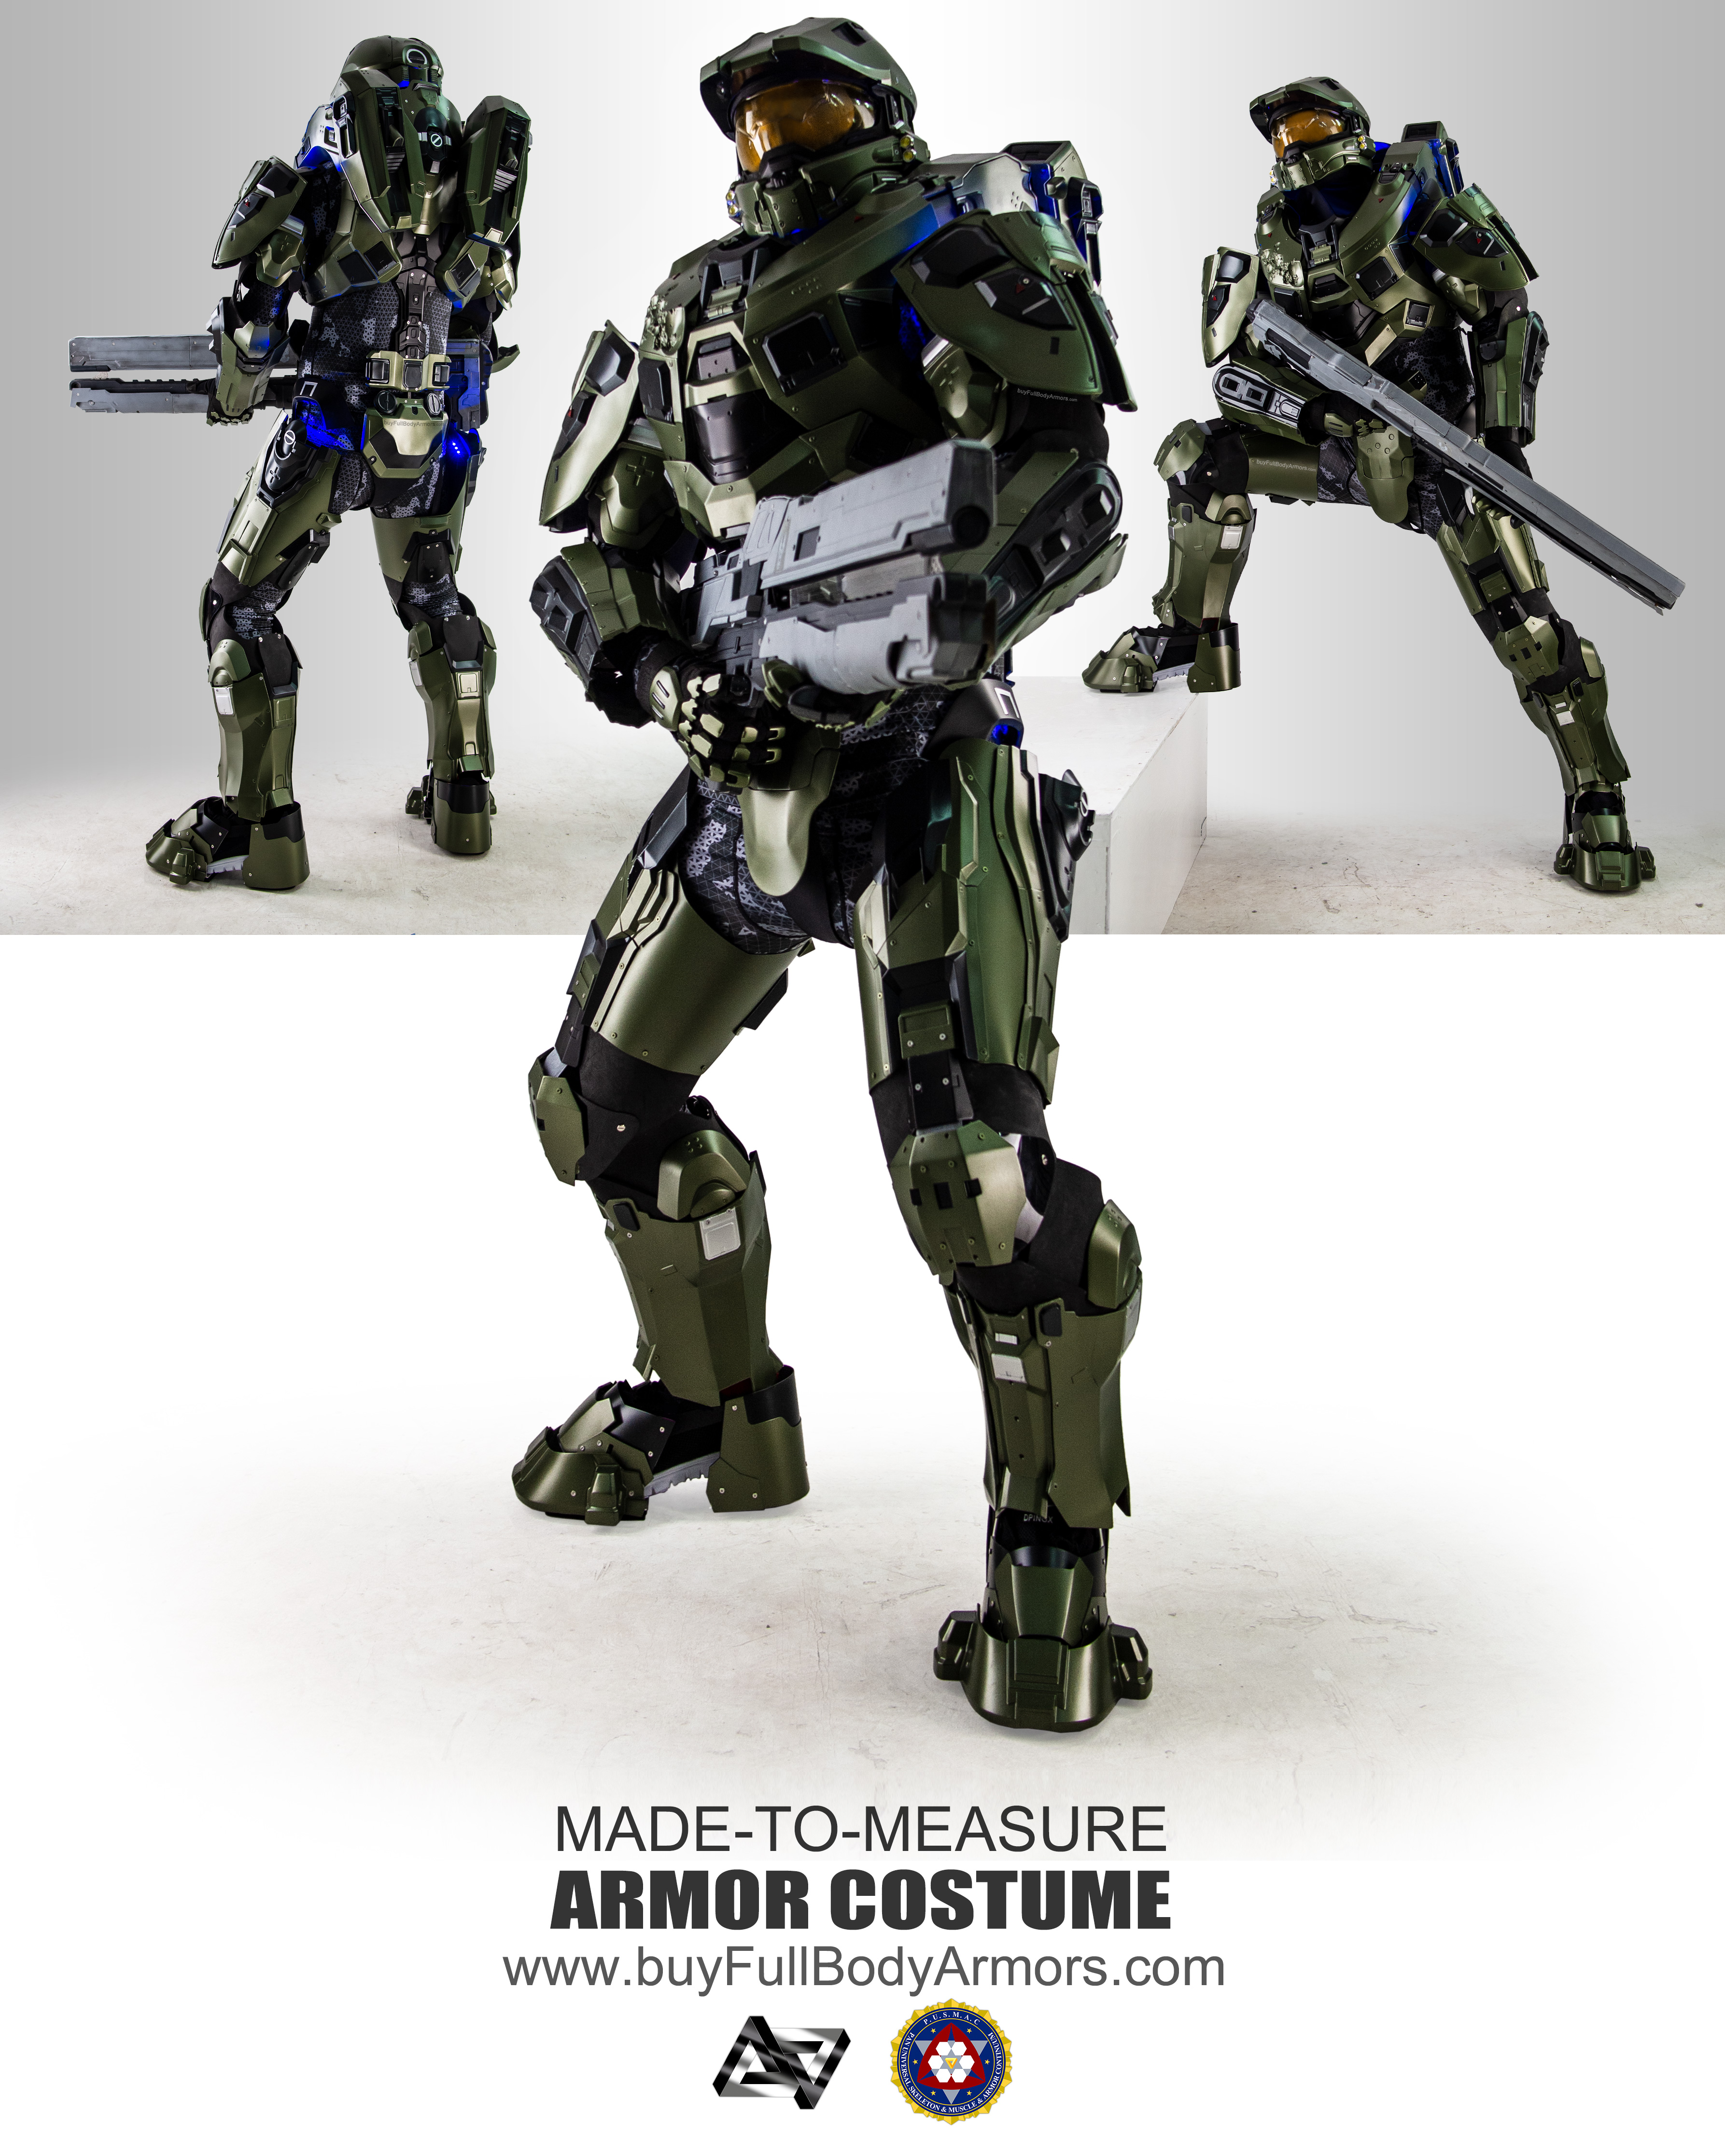 Halo 5 Master Chief Armor Suit Costume poster